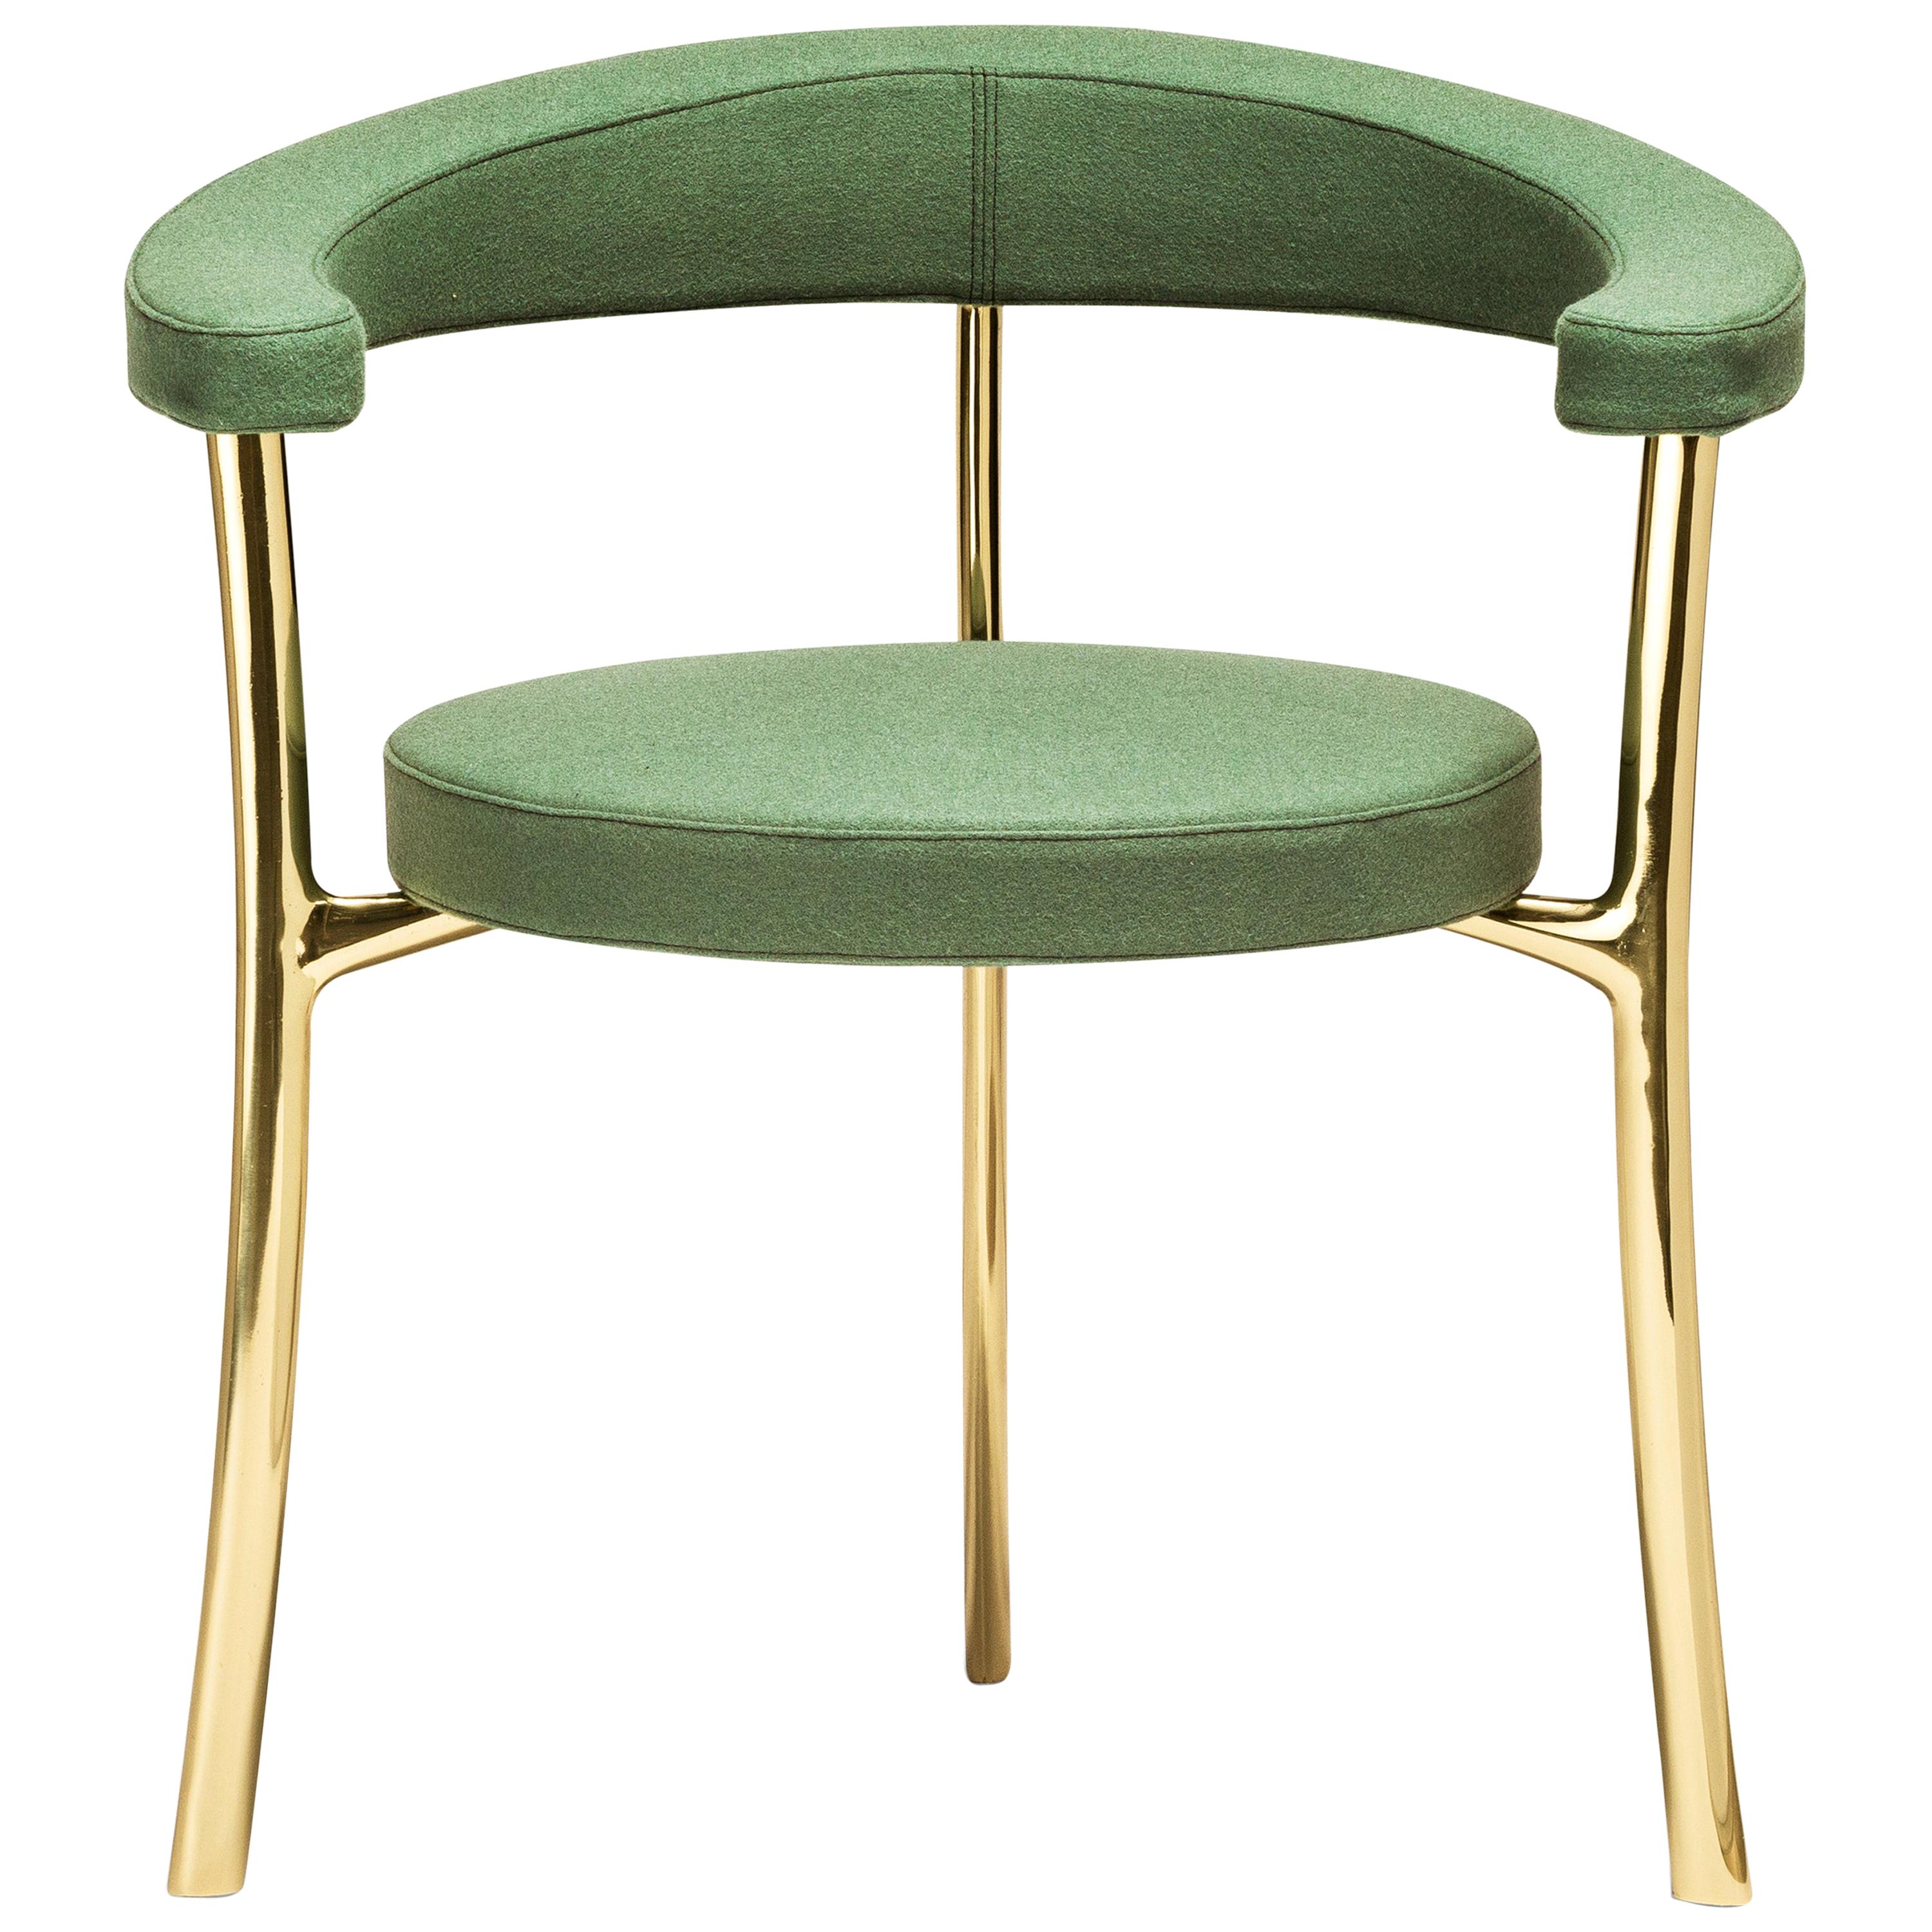 Katana Armchair in Green Fabric with Polished Brass by Paolo Rizzatto